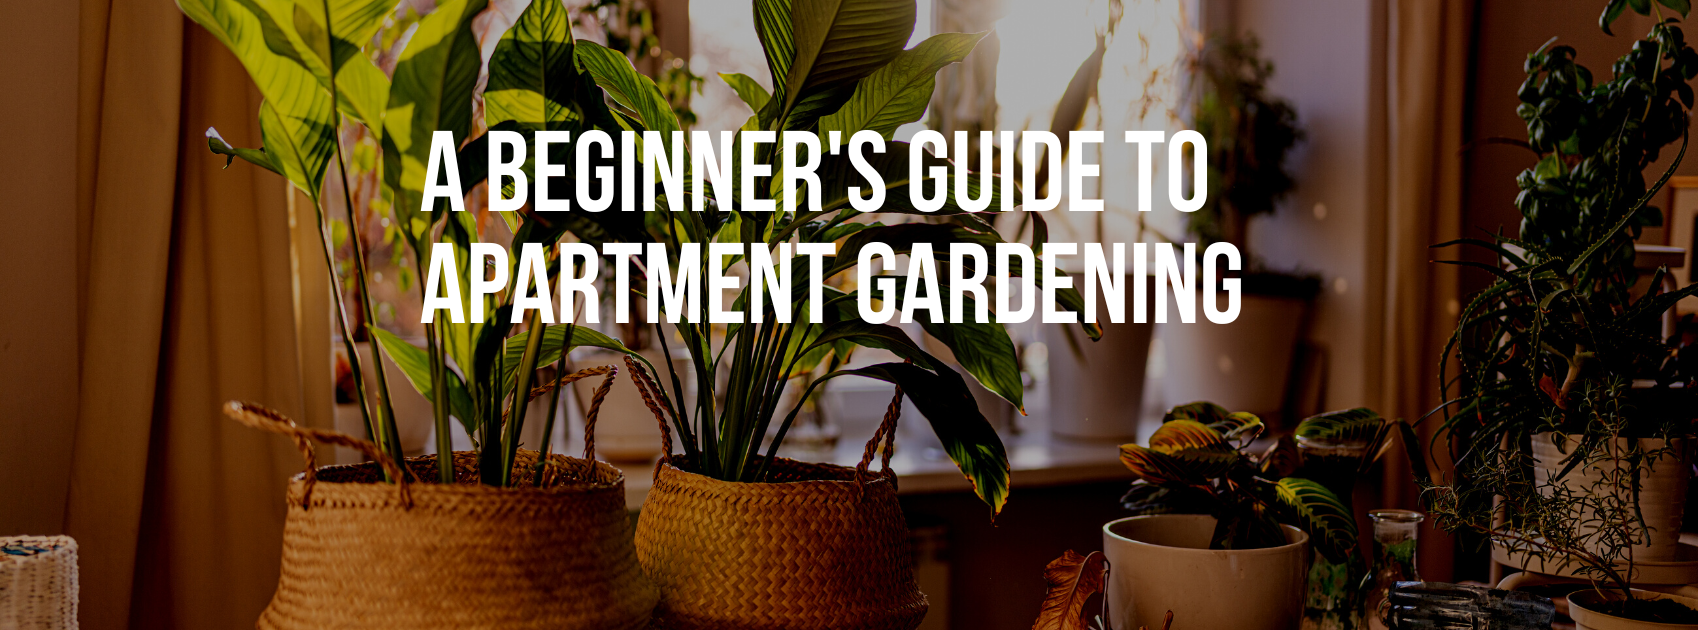 A Beginner's Guide to Apartment Gardening